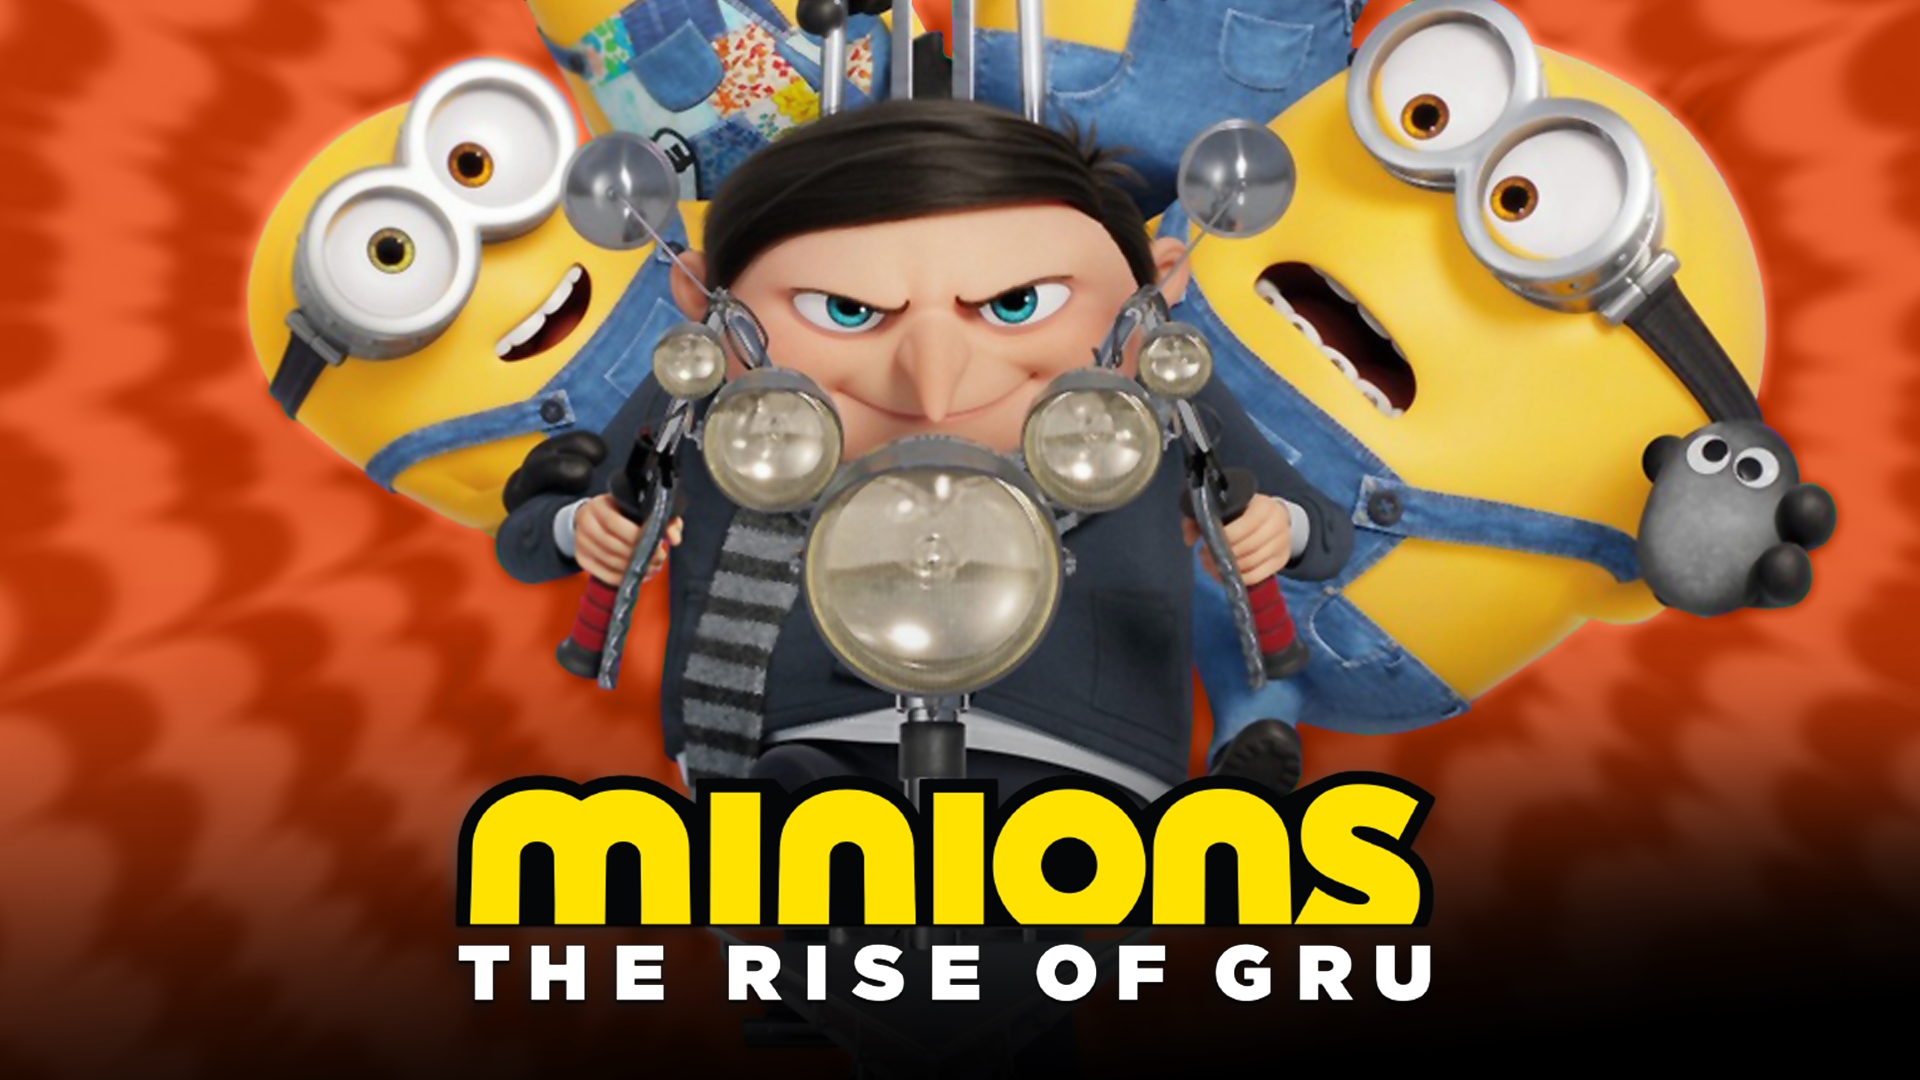 Minions: The Rise of Gru is unstoppable fun